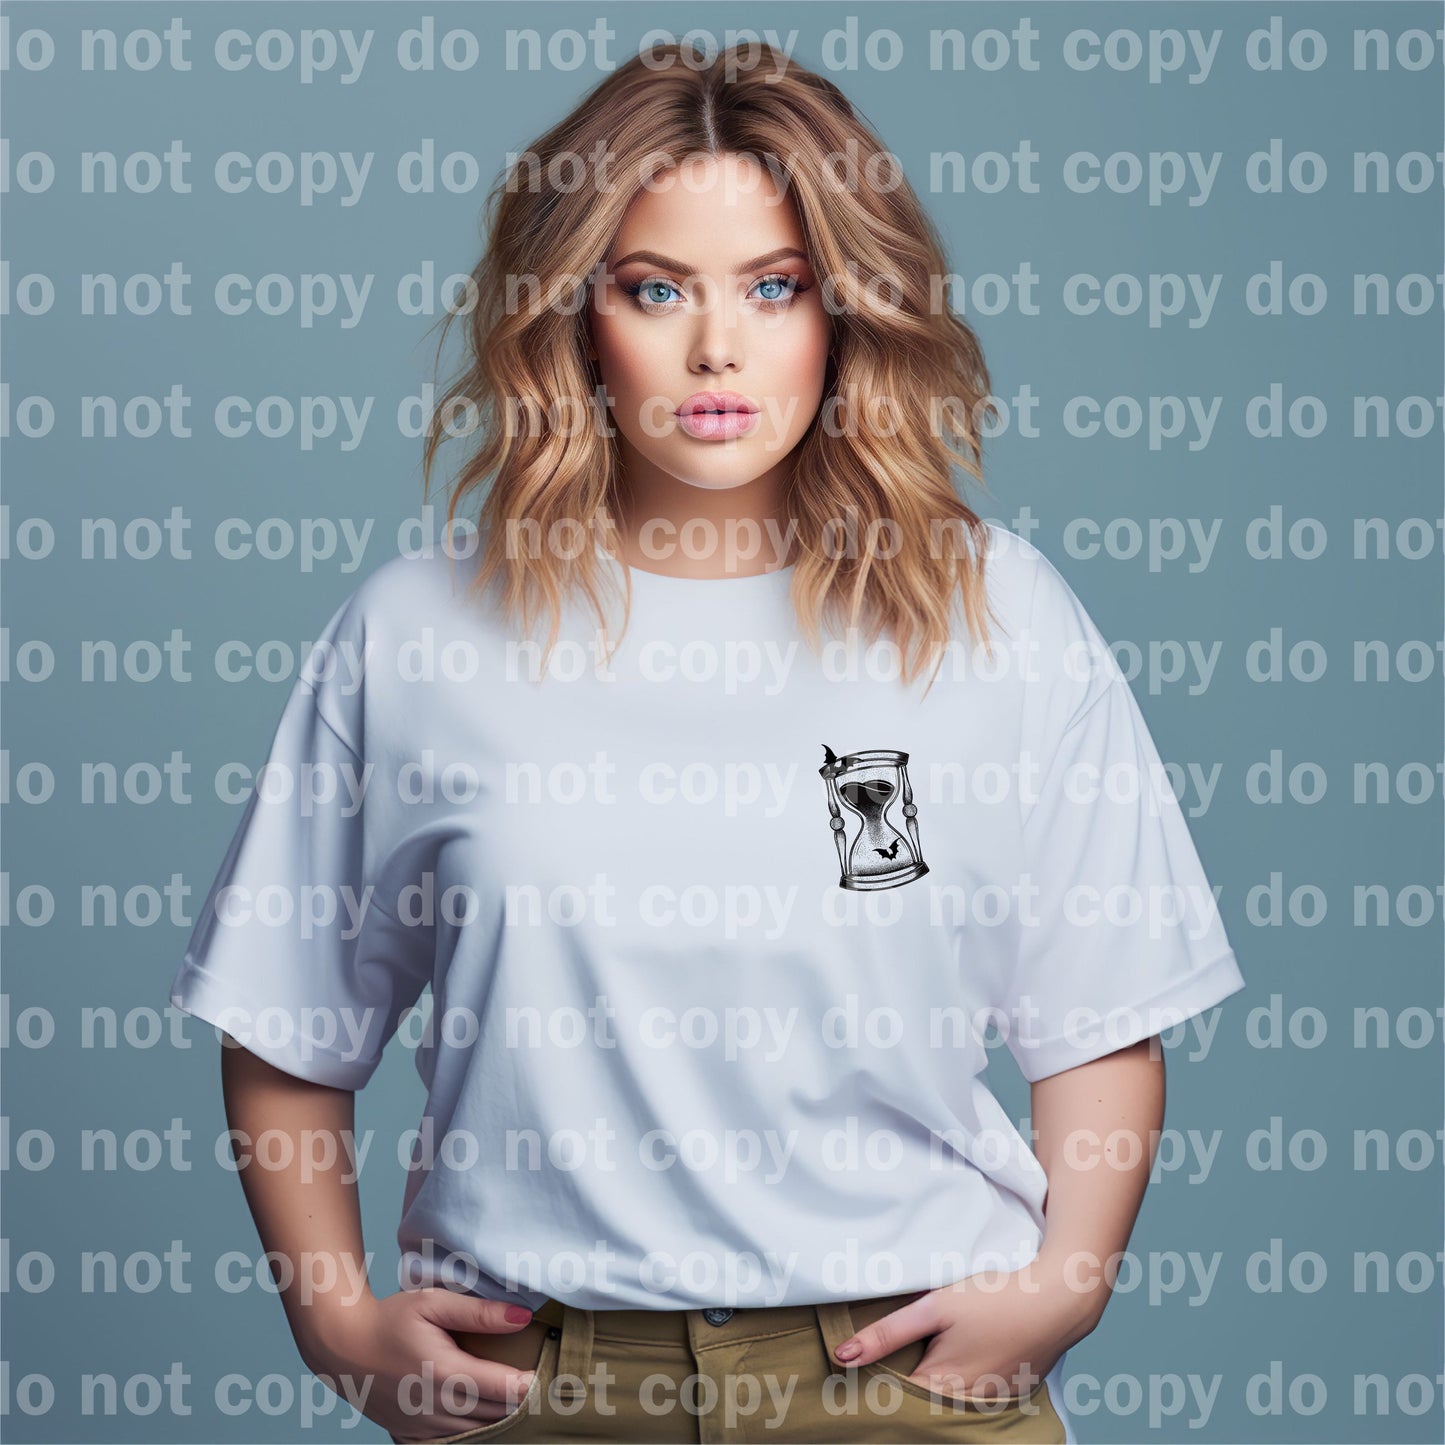 I Don't Have Time For Temporary People with Pocket Option Dream Print or Sublimation Print